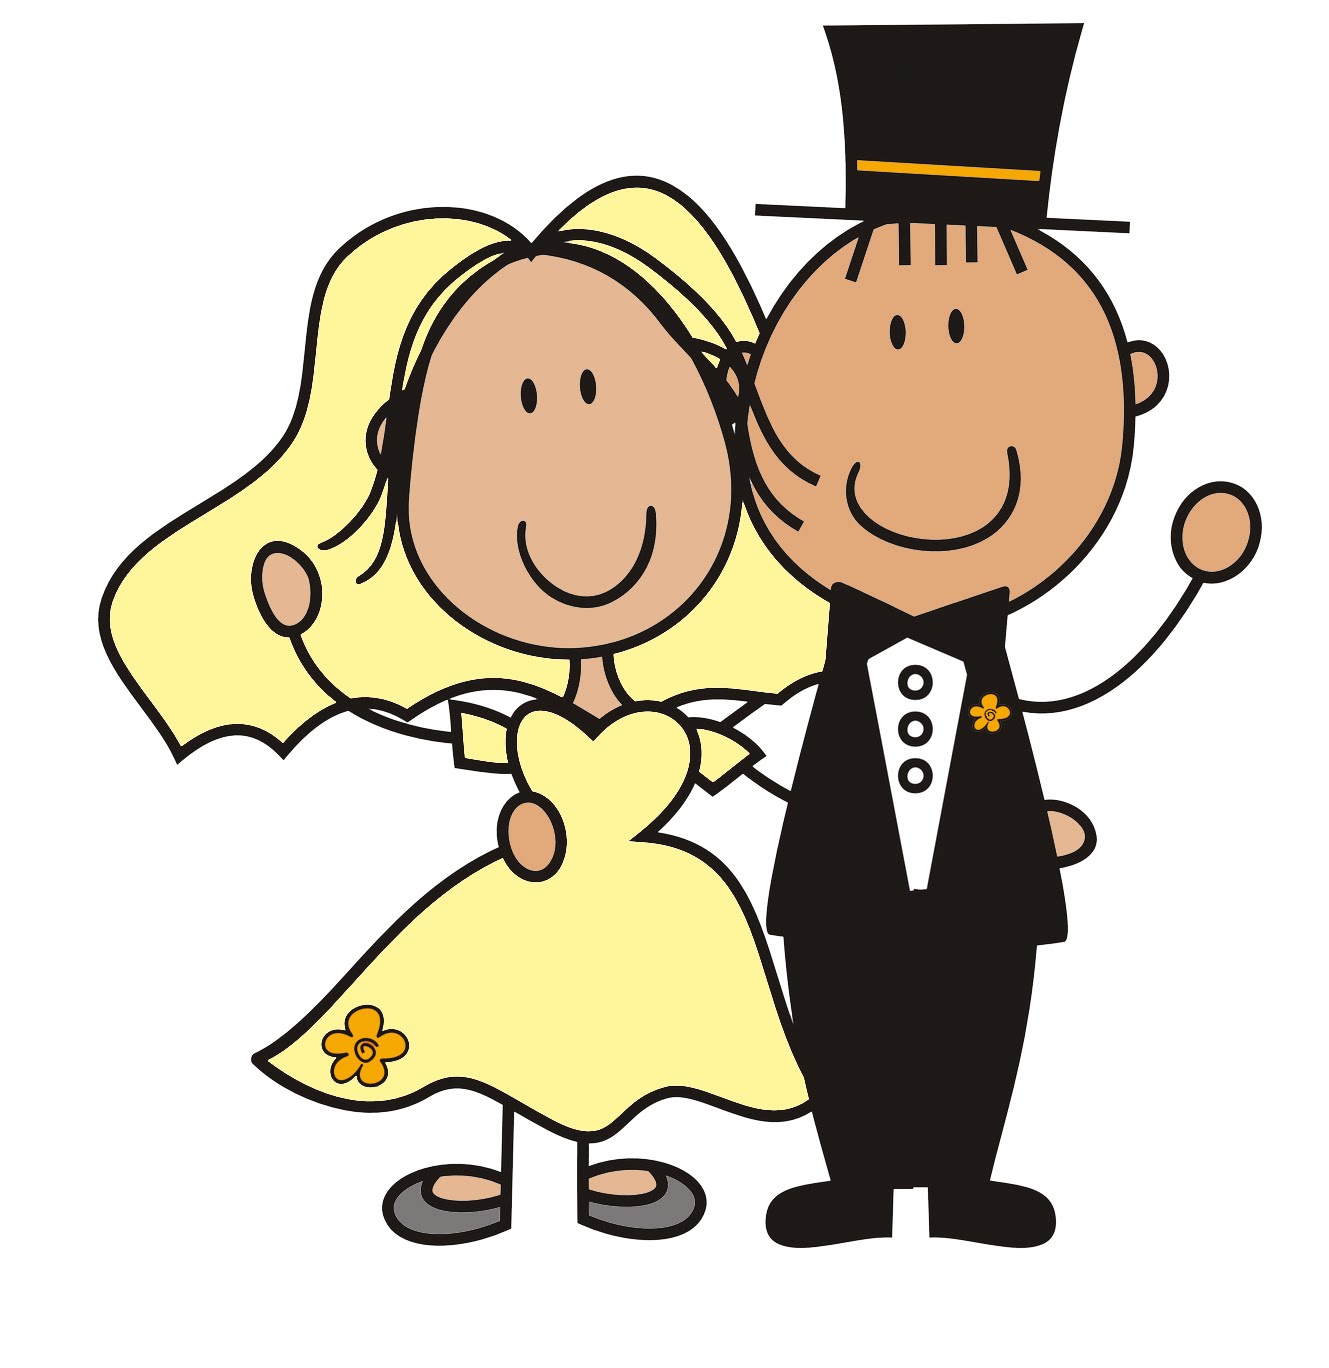 Wedding Couple Cartoon Images | Free Download Clip Art | Free Clip ...